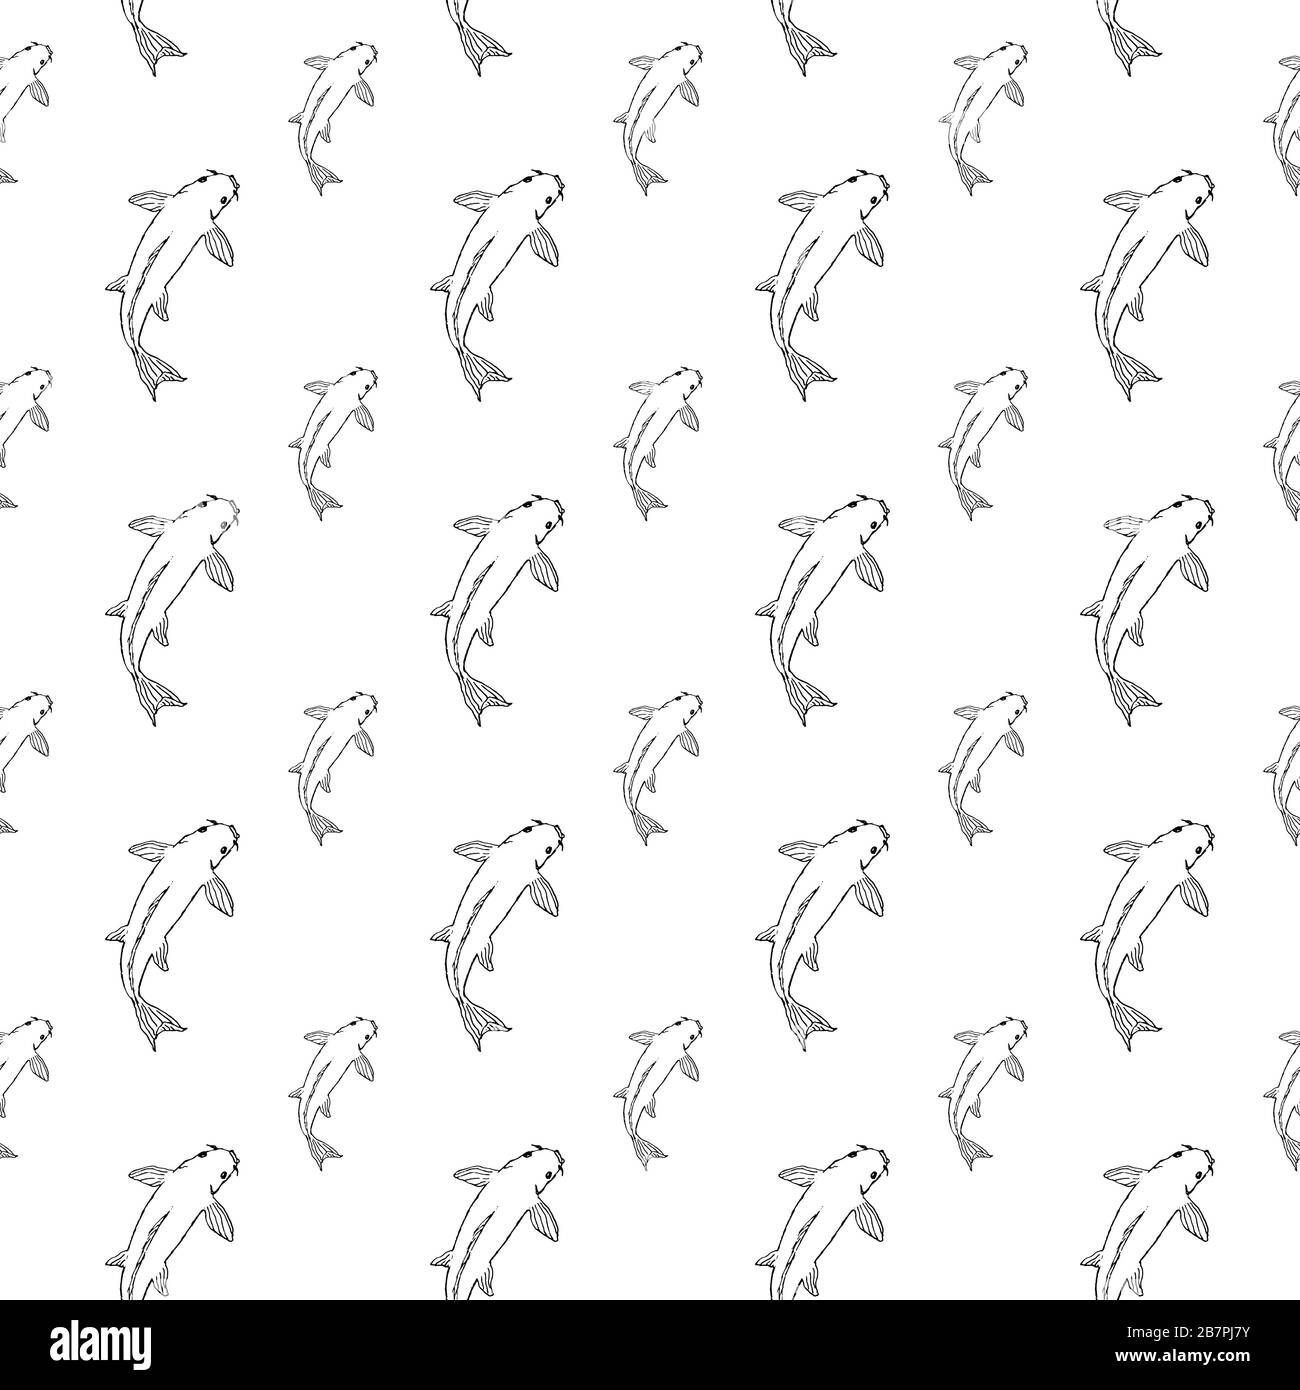 Koi fish seamless pattern. Hand drawing sketch. Black outline on white background. Vector illustration can be used in greeting cards, posters, flyers, banners, logo, further design etc. EPS10 Stock Vector